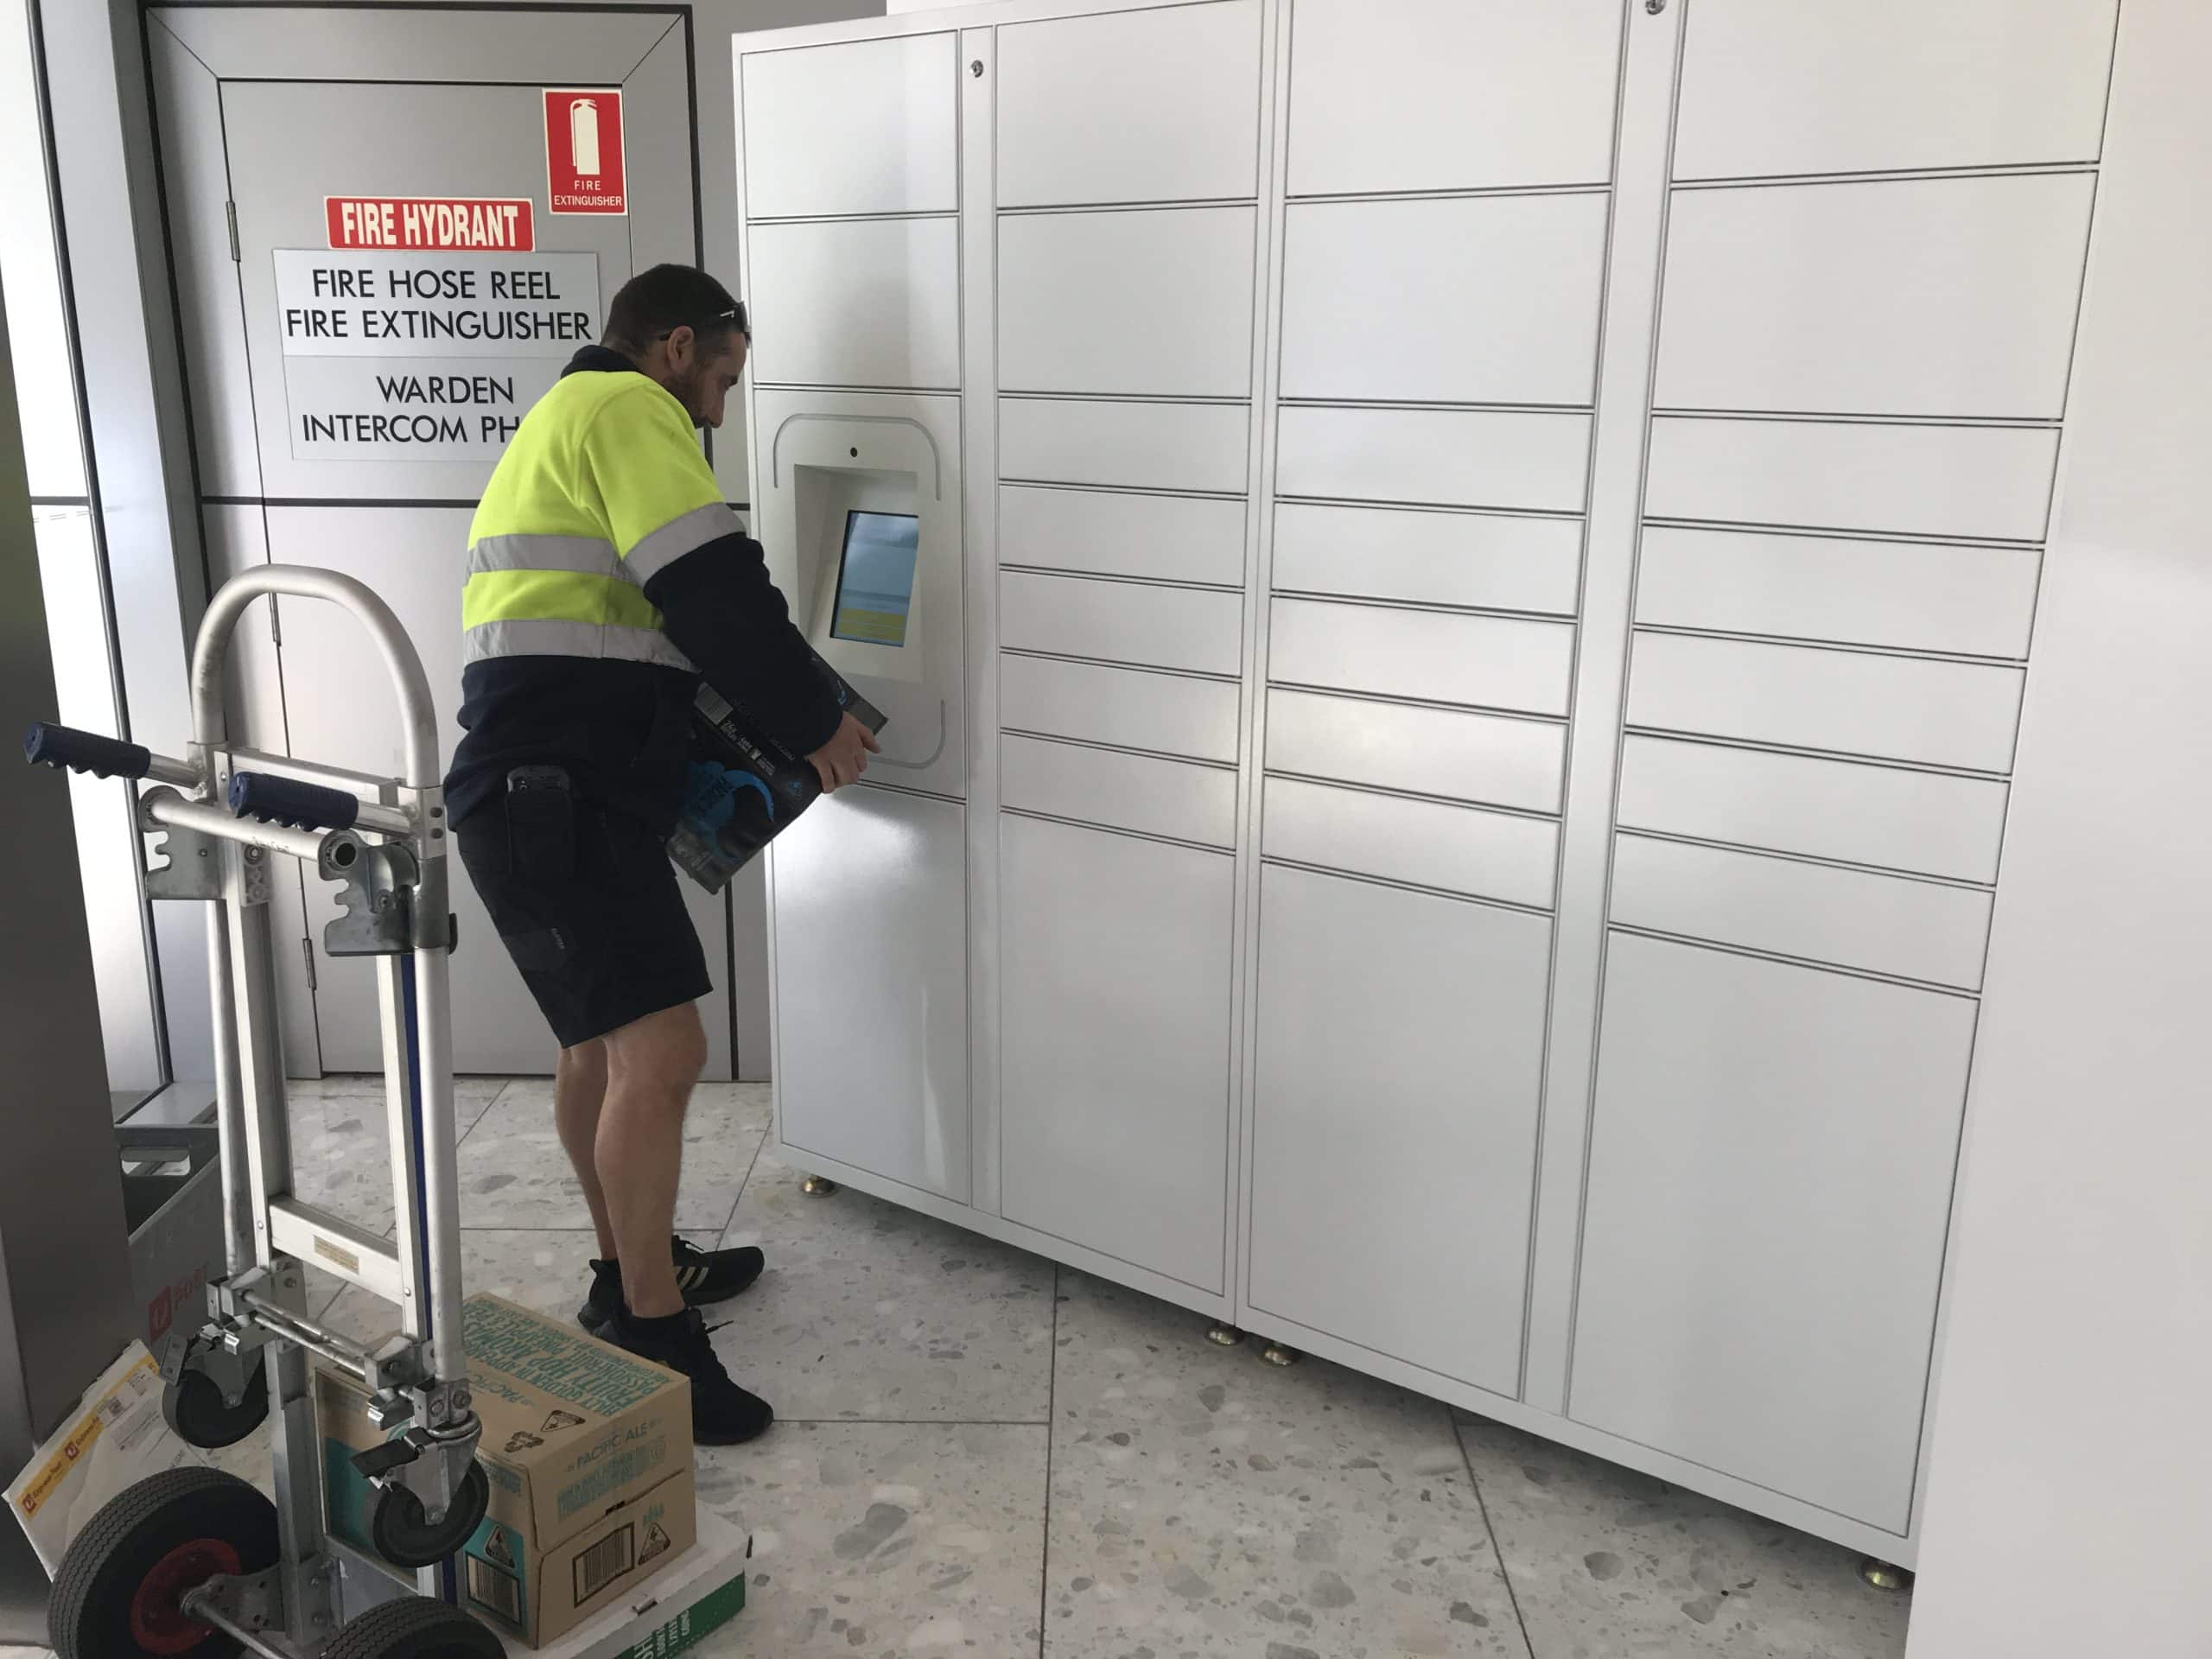 Couriers love parcel lockers